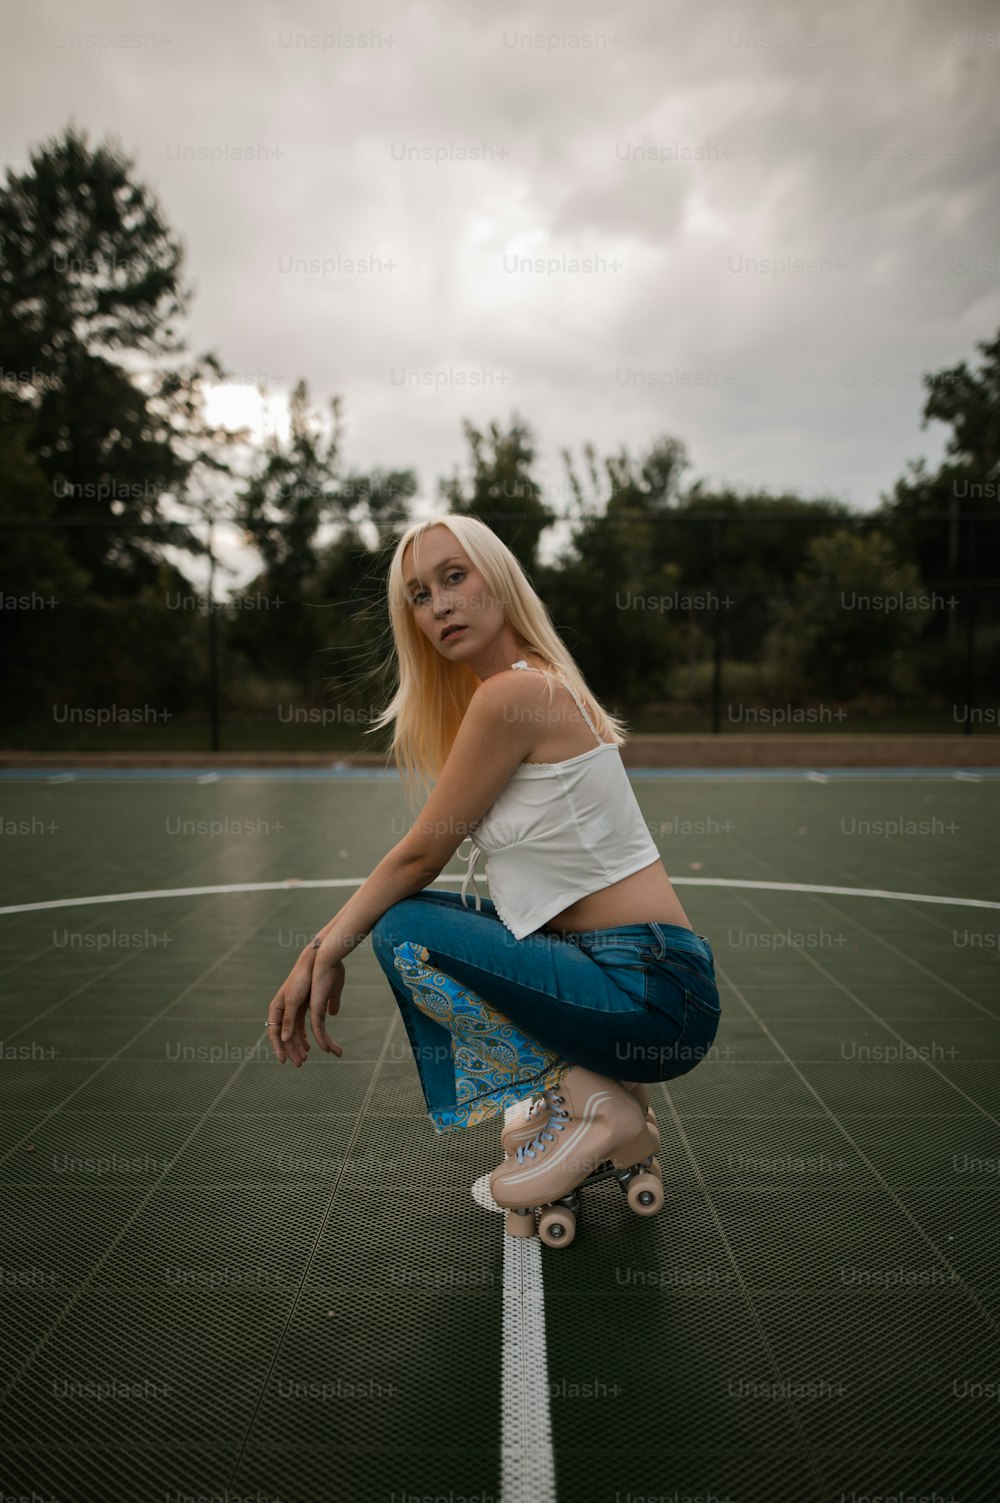 a woman sitting on a skateboard on a tennis court